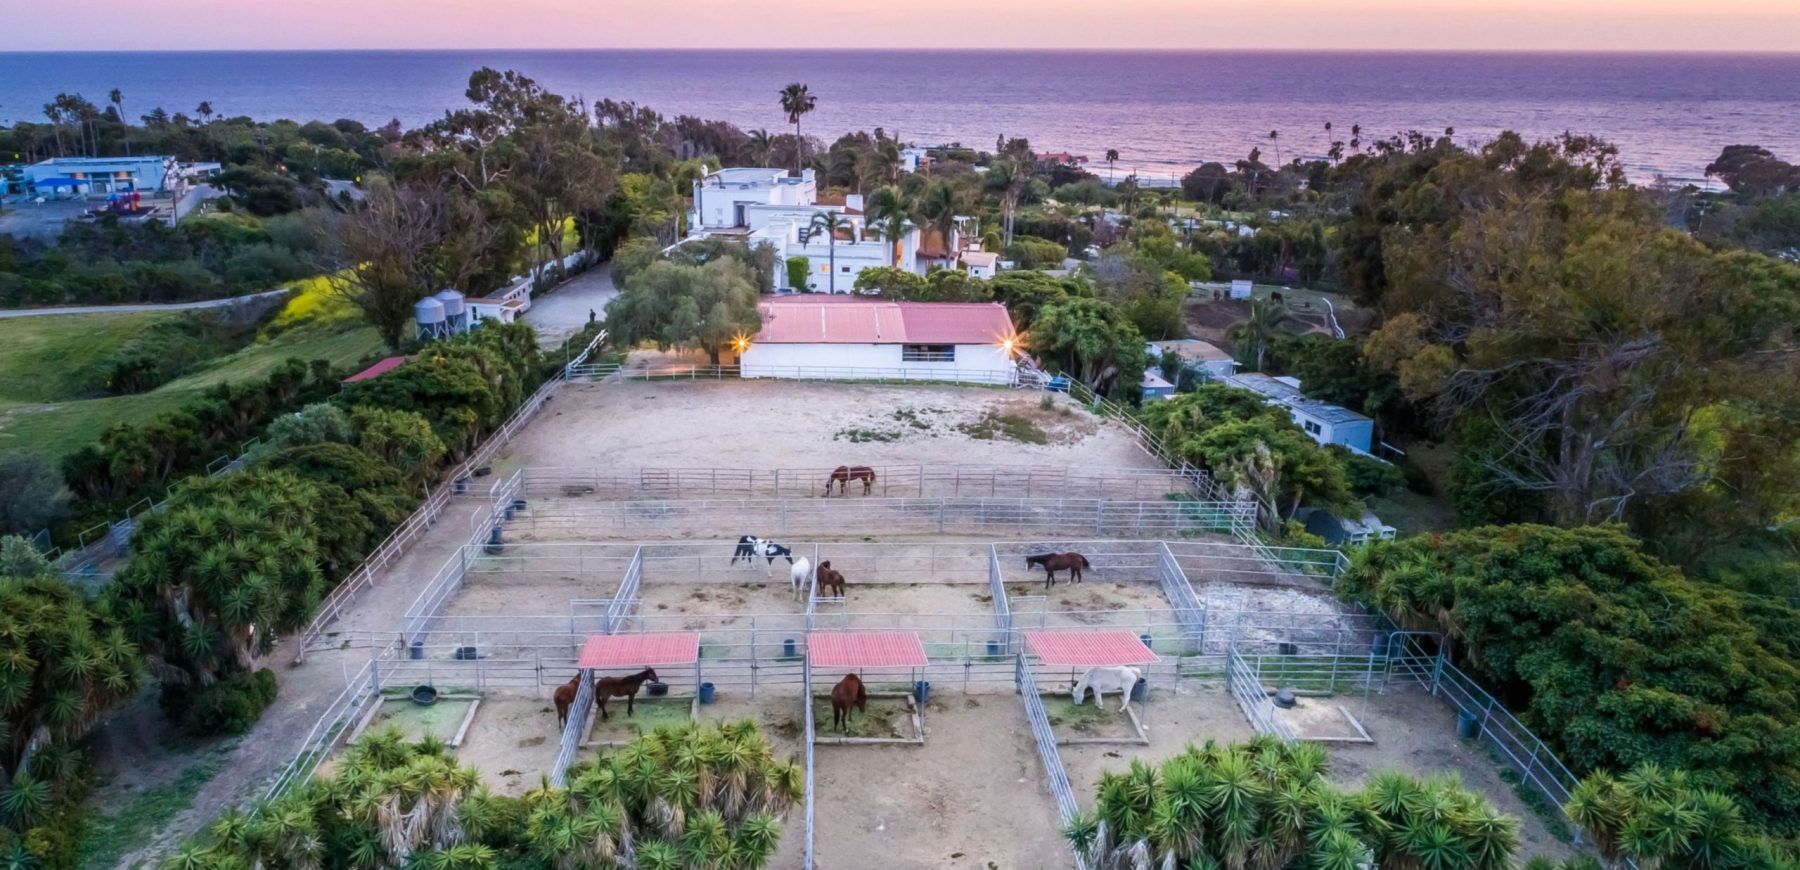 HORSES-IN-REAR-MANSION-IN-FOREGROUND-OCEAN